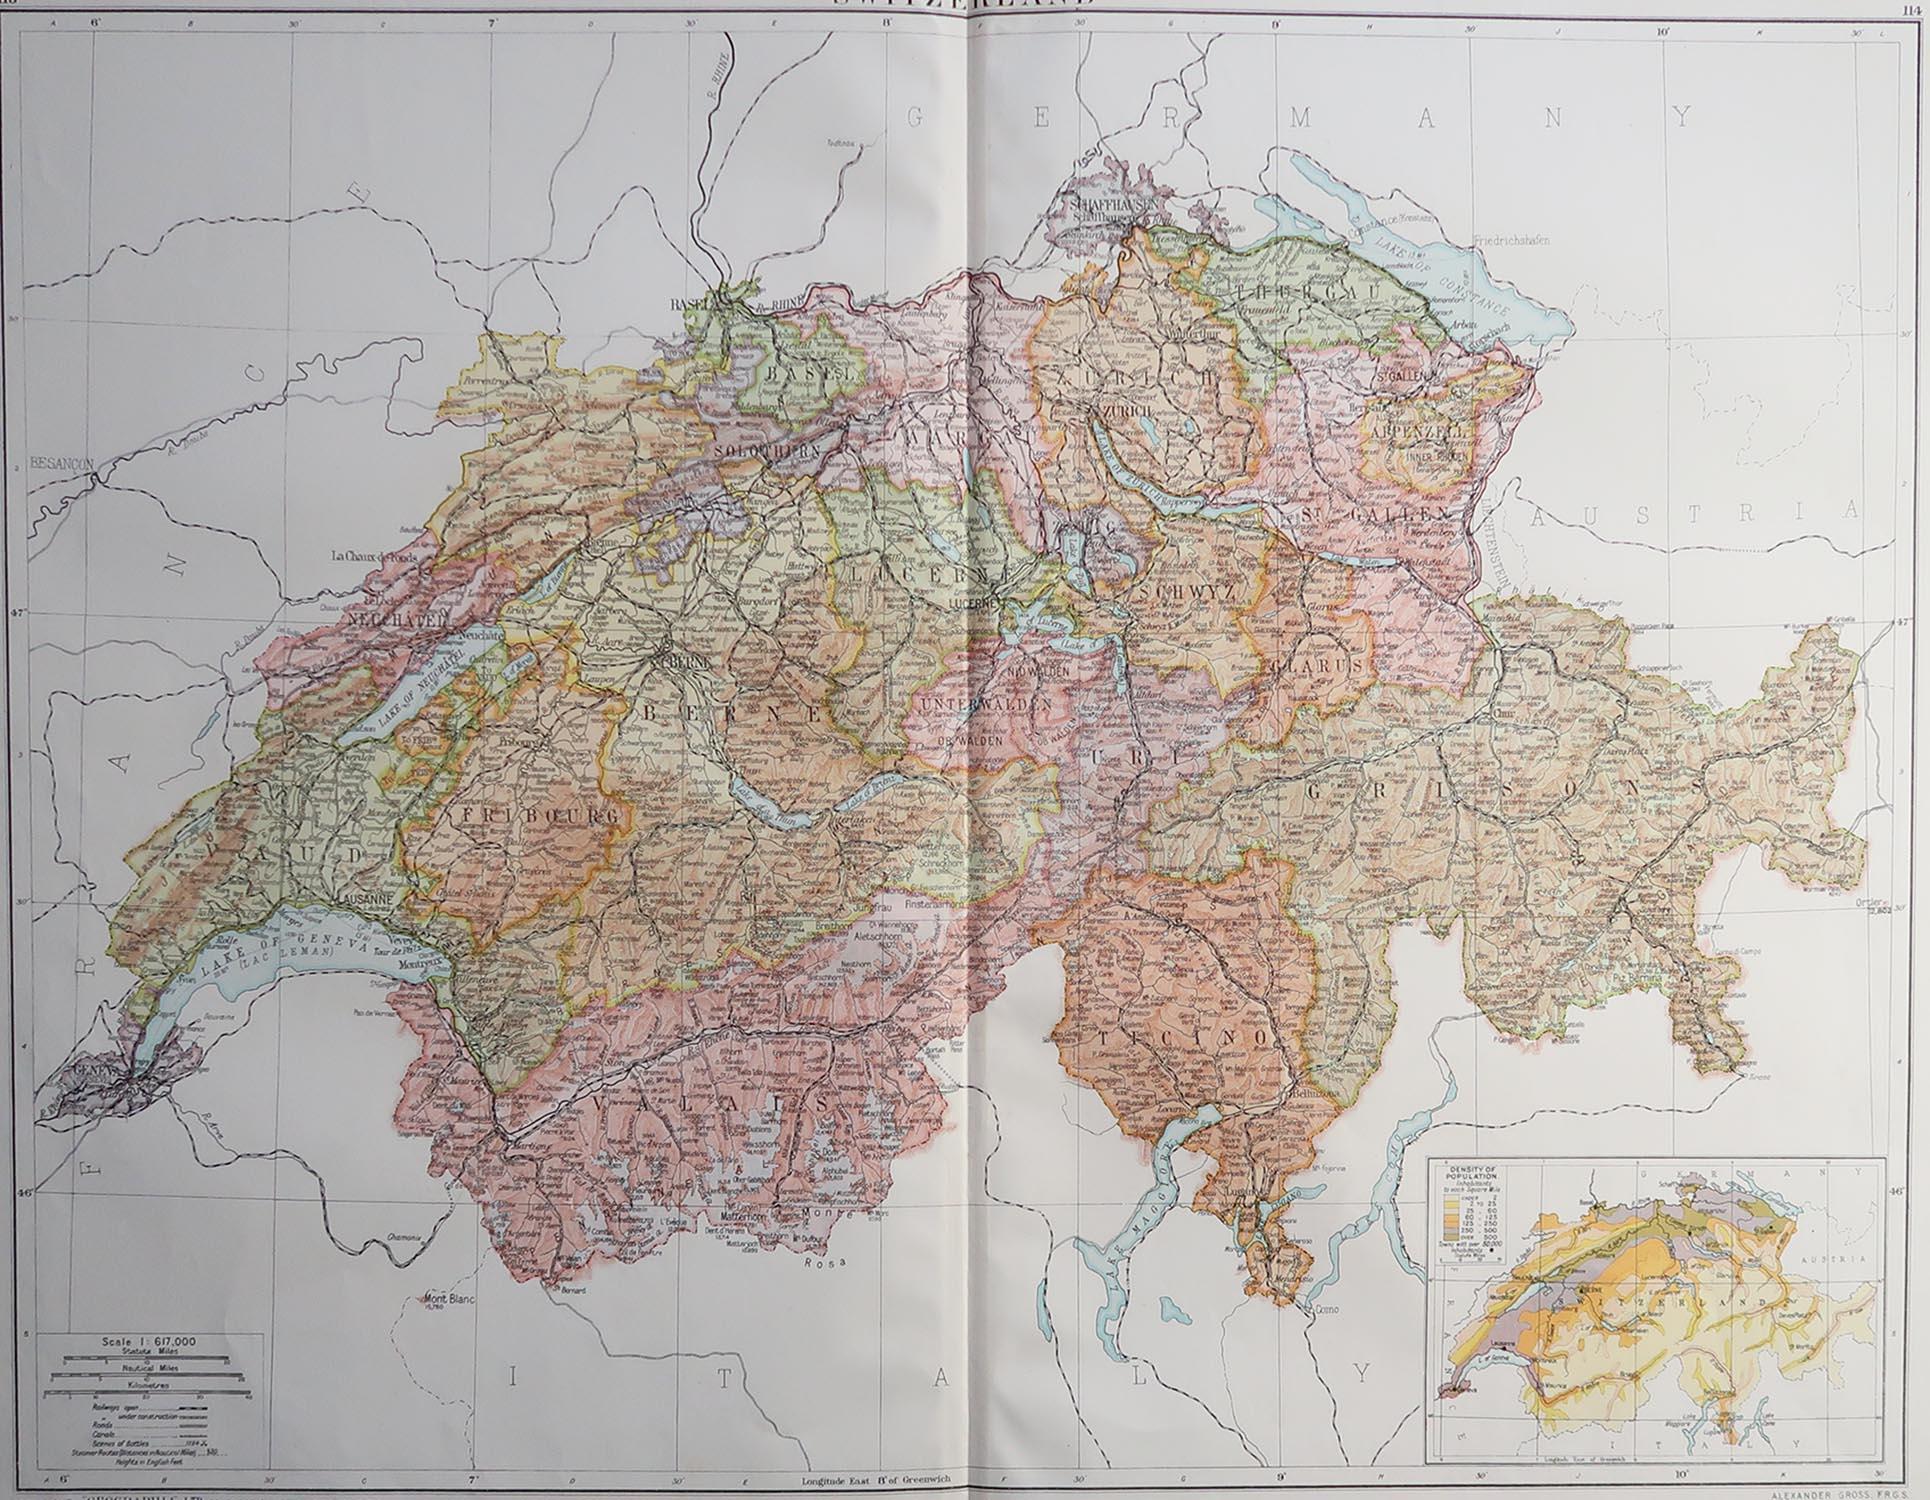 Great map of Switzerland

Original color.

Good condition 

Published by Alexander Gross

Unframed.








 